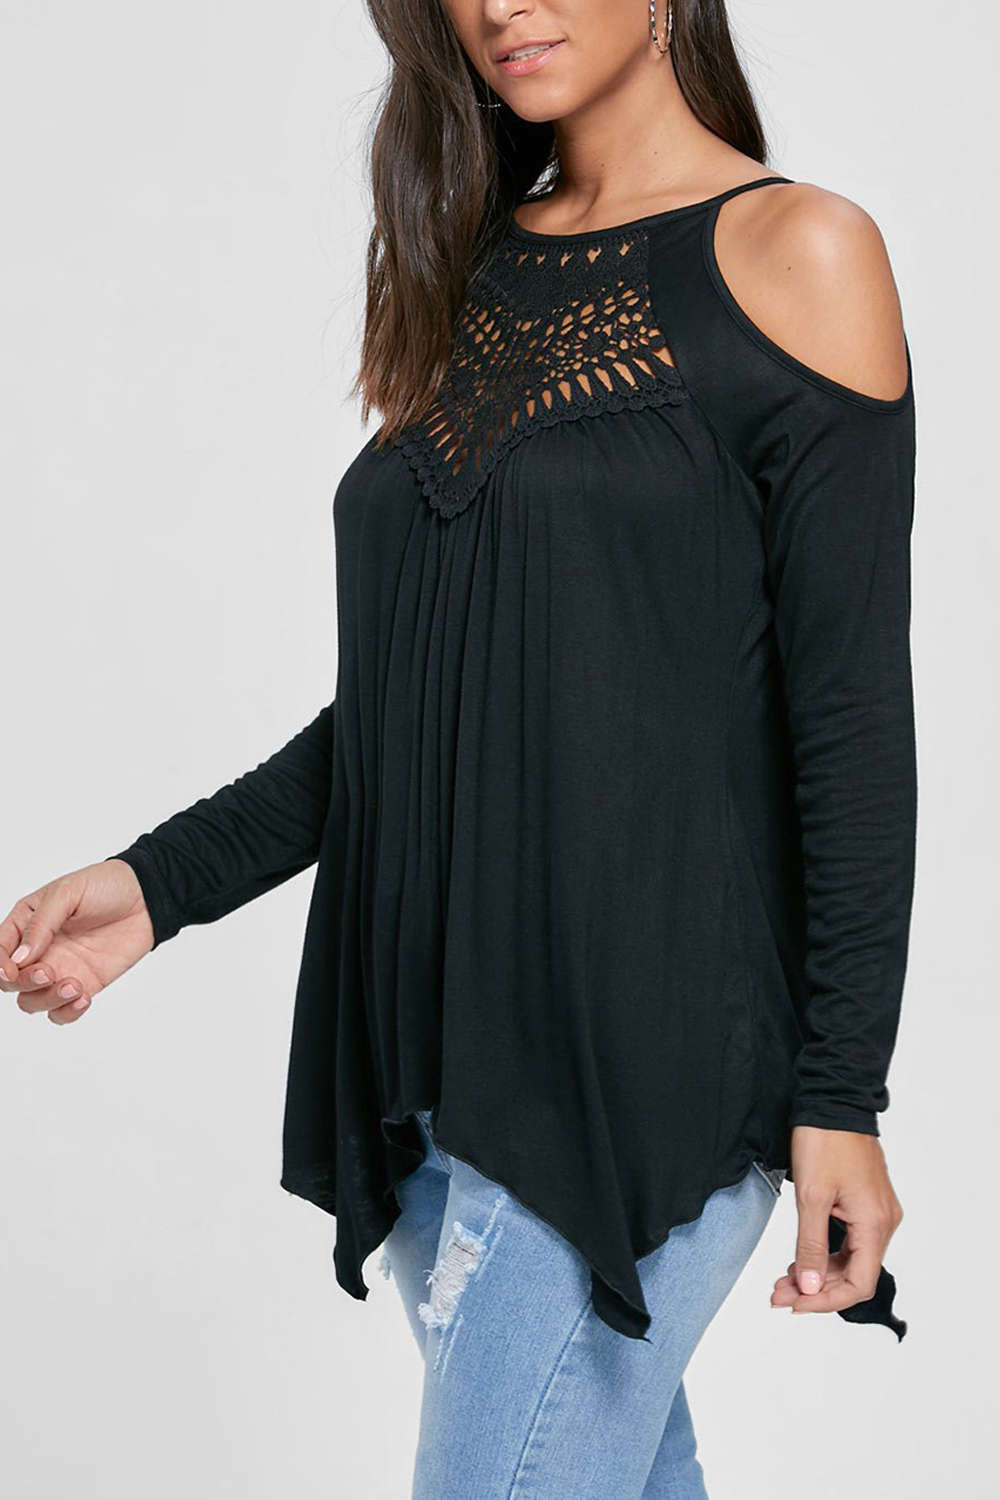 Iyasson Lace Hollow Out Cold Shoulder Blouse